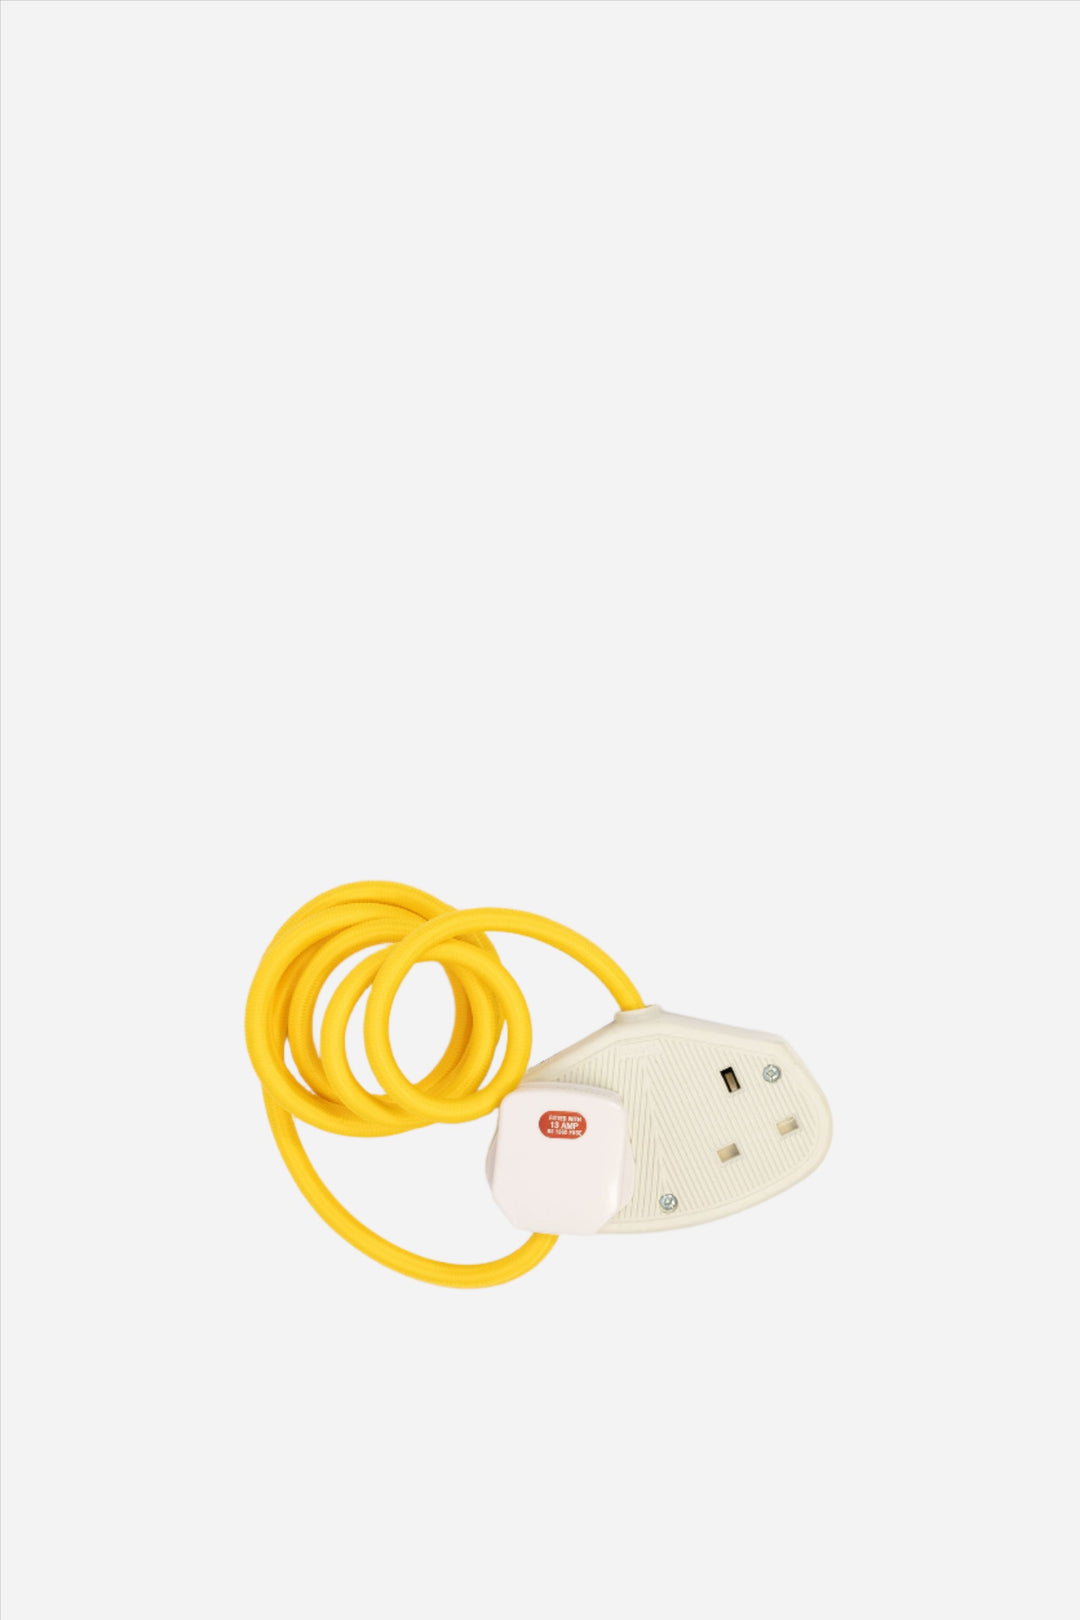 DIPCORD Extension Lead / Yellow White